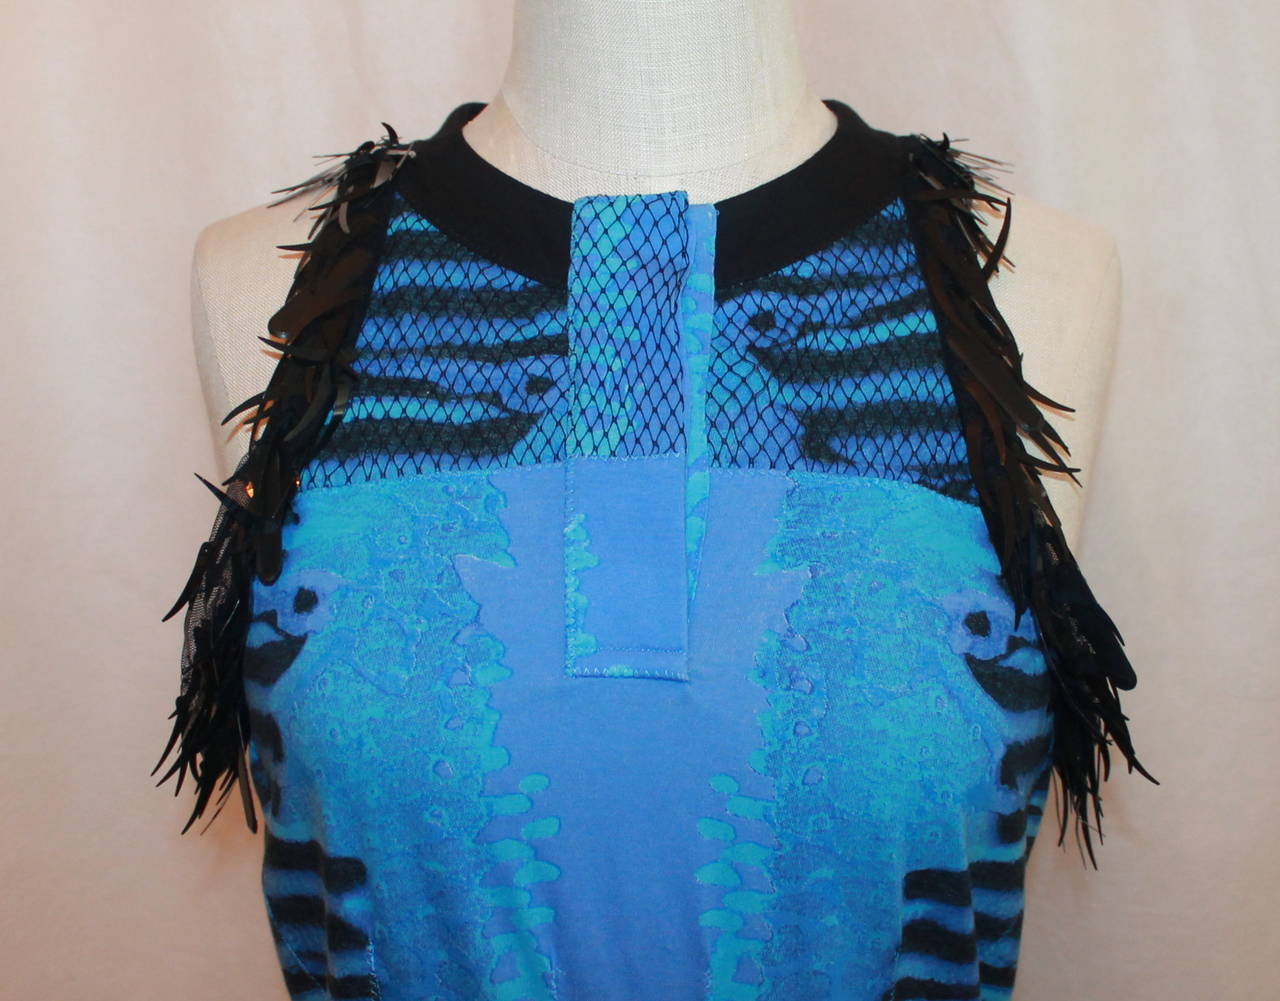 Roberto Cavalli Blue and Black Sleeveless Cotton Top - 42 In Excellent Condition For Sale In West Palm Beach, FL